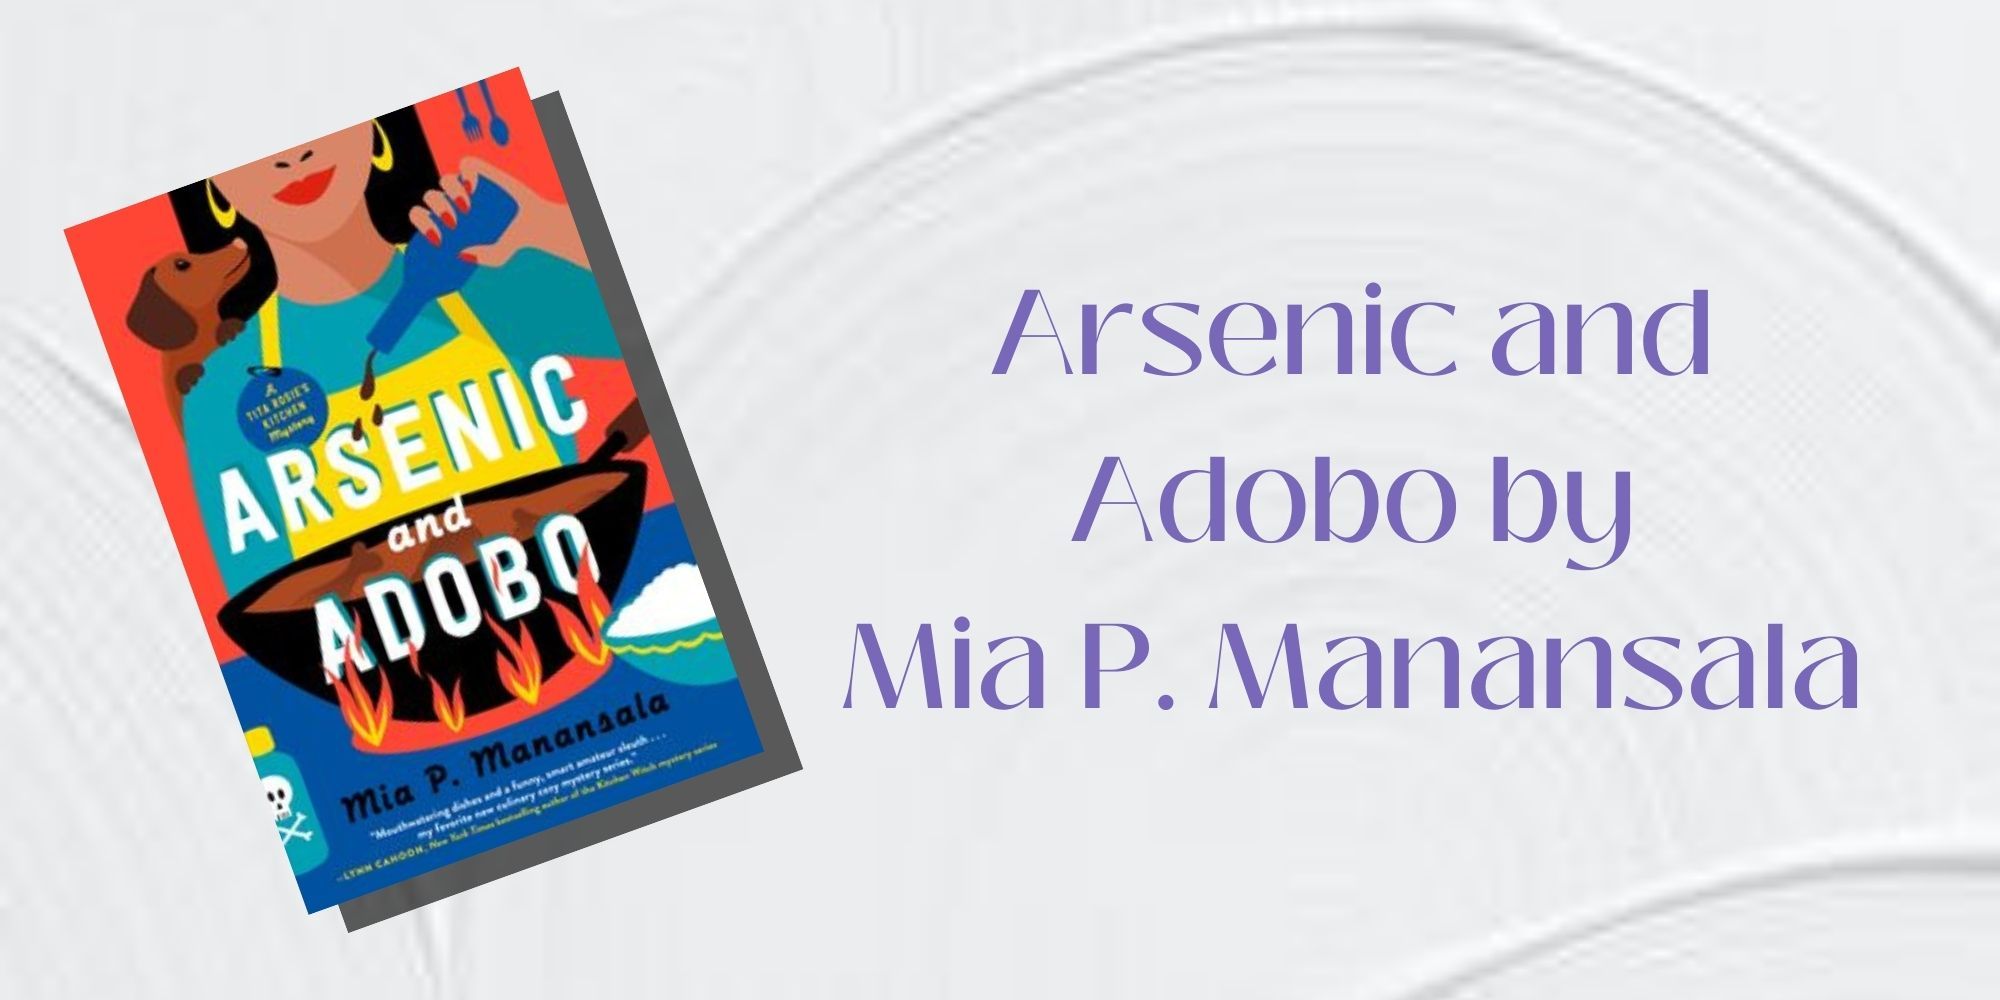 The cover of Arsenic and Adobo by Mia P. Manansala